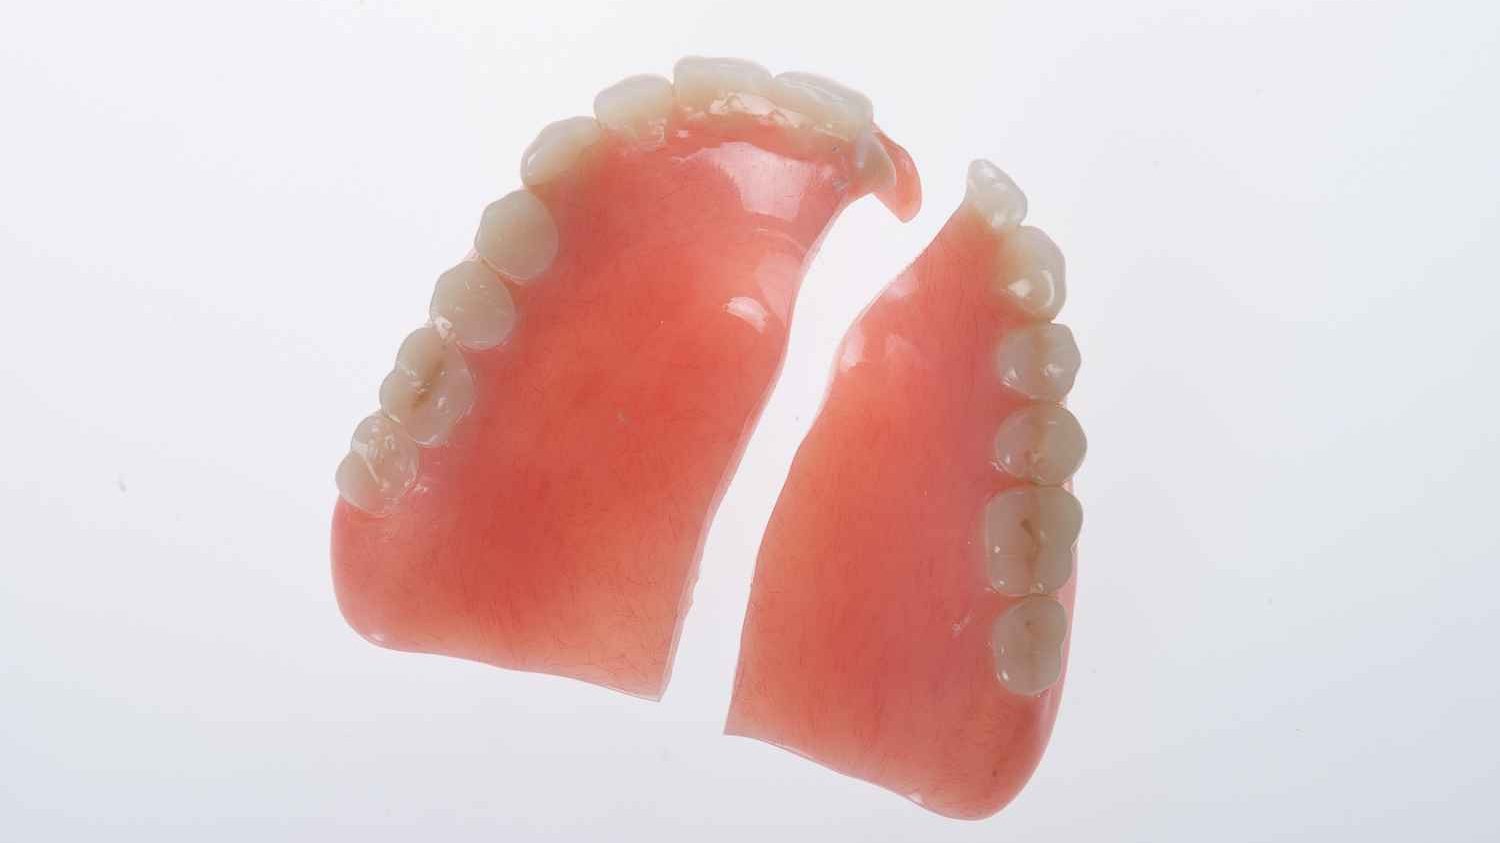 Why does a repaired denture fracture again?